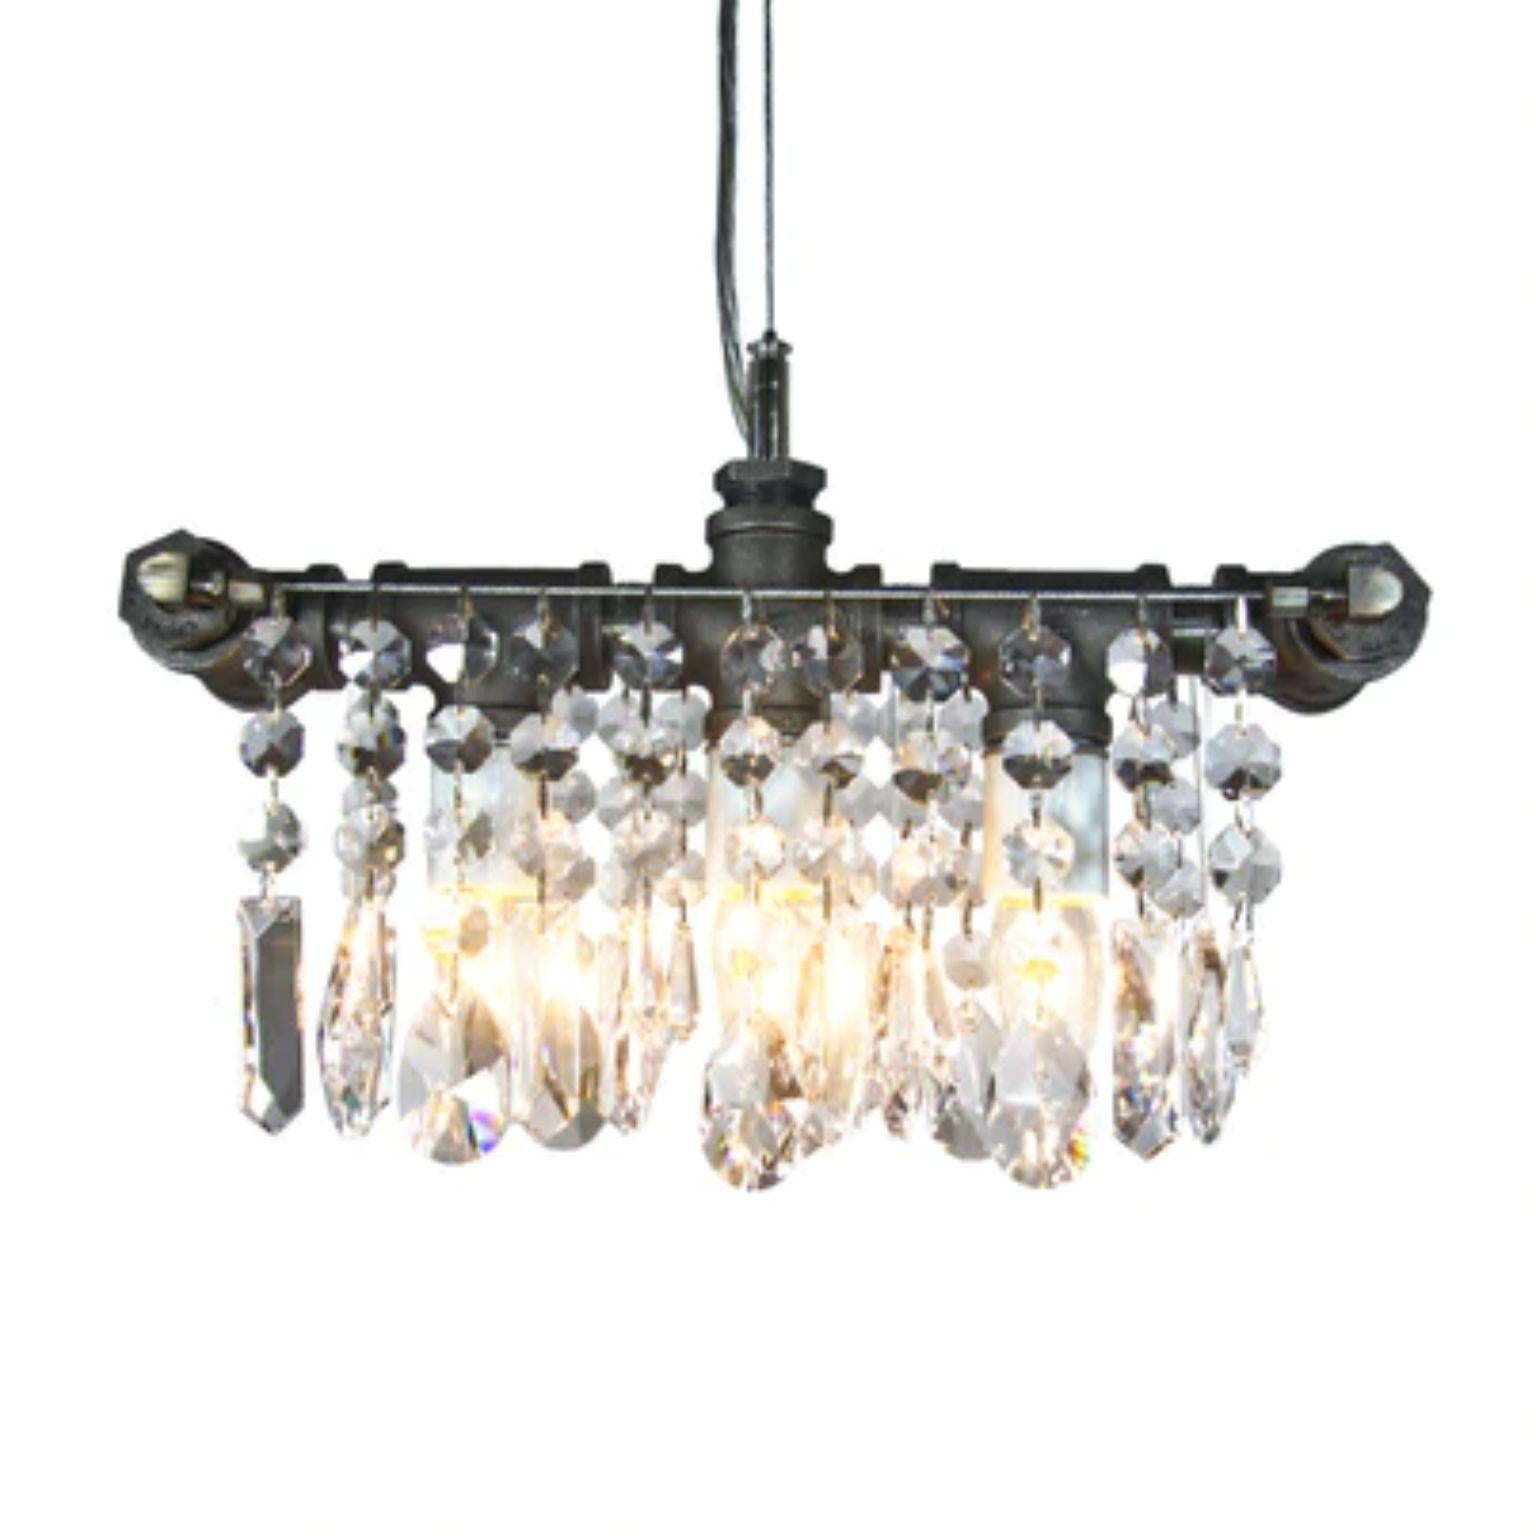 Industrial three bulb chandelier pendant by Michael McHale.
Dimensions: D 11.5 x W 35.5 x H 20 cm.
Materials: steel, optically-pure gem-cut crystal.

3 x medium base CA7 bulb, either incandescent or LED

All our lamps can be wired according to